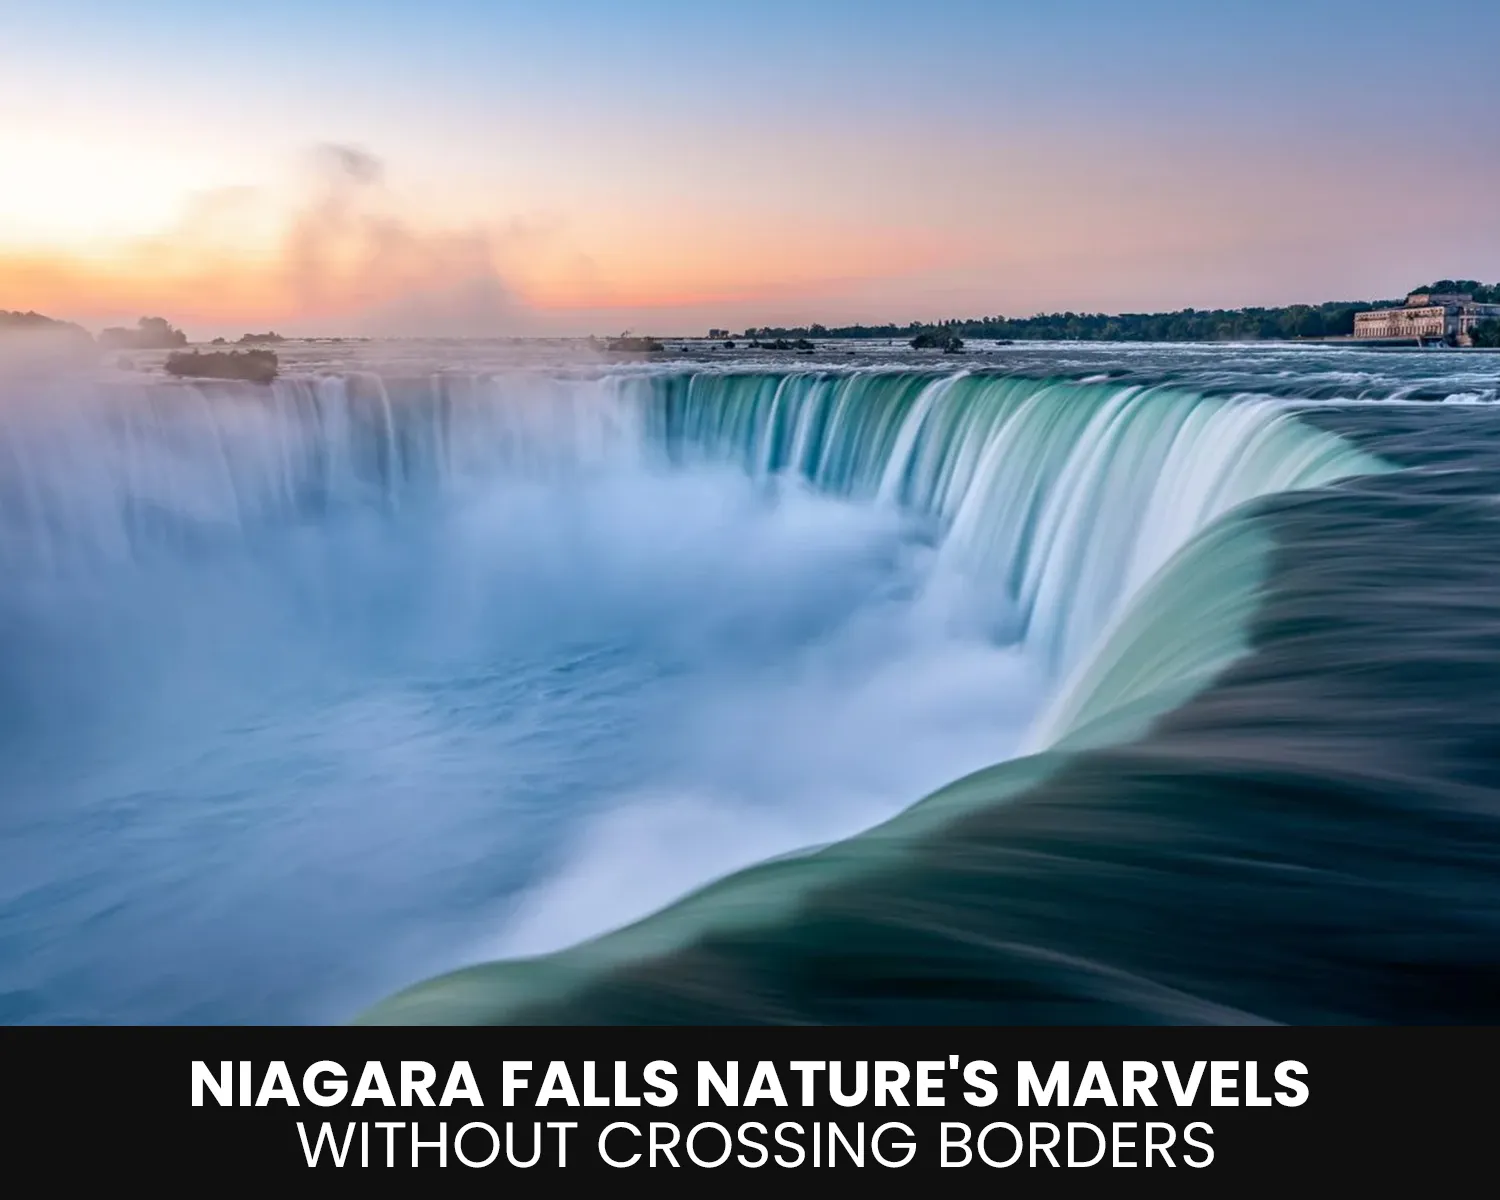 Niagara Falls: Nature's Marvels Without Crossing Borders